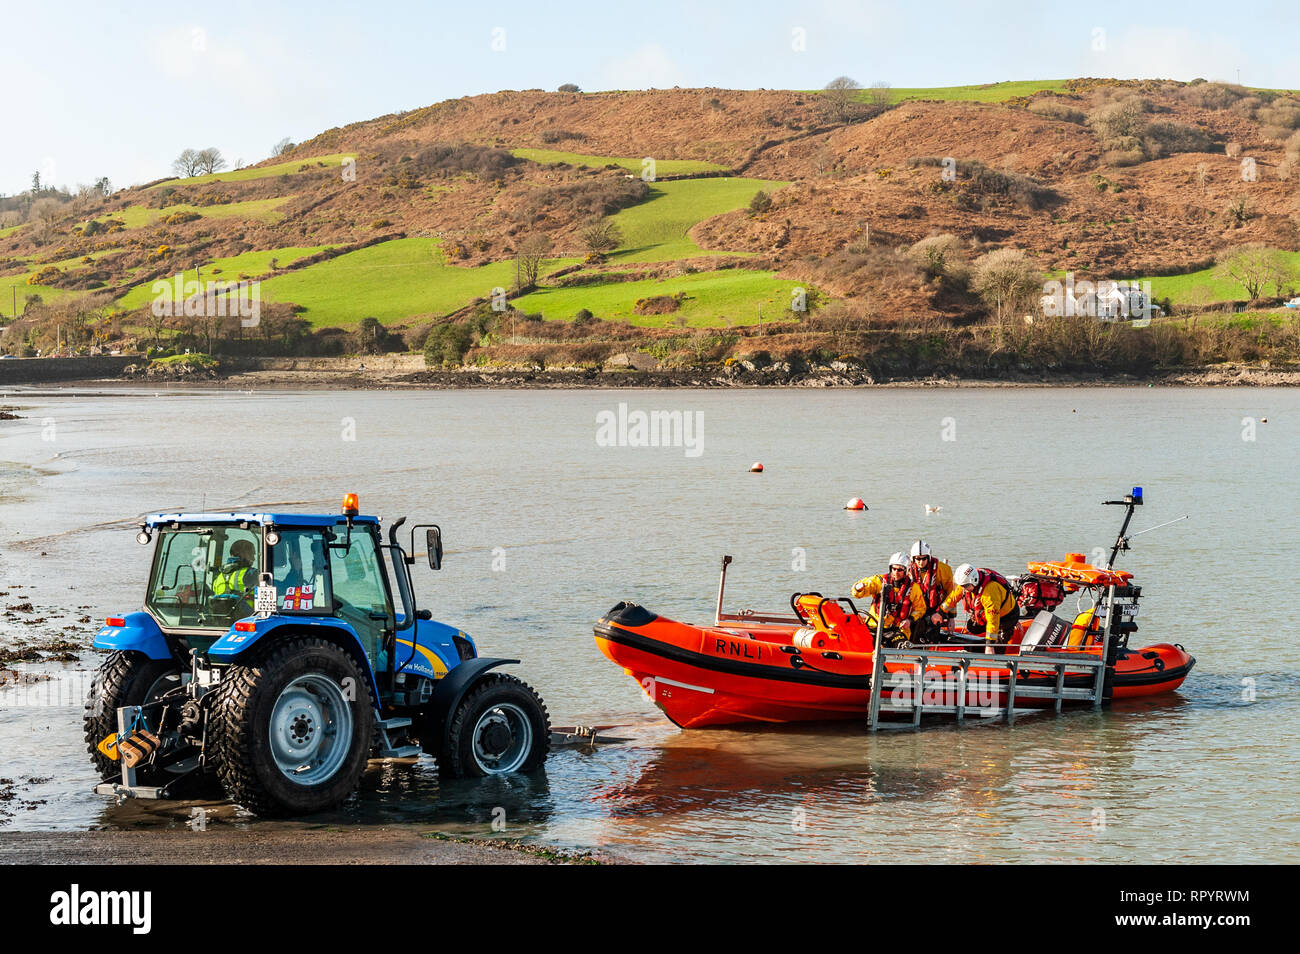 Union Hall, West Cork, Ireland. 23rd Feb, 2019. The RNLI Lifeboat 'Margaret Bench Of Solihull' is launched at Union Hall to participate in a man overboard demonstration for the general public. The lifeboat was called out 10 times in 2018 and once so far this year. Credit: Andy Gibson/Alamy Live News. Stock Photo